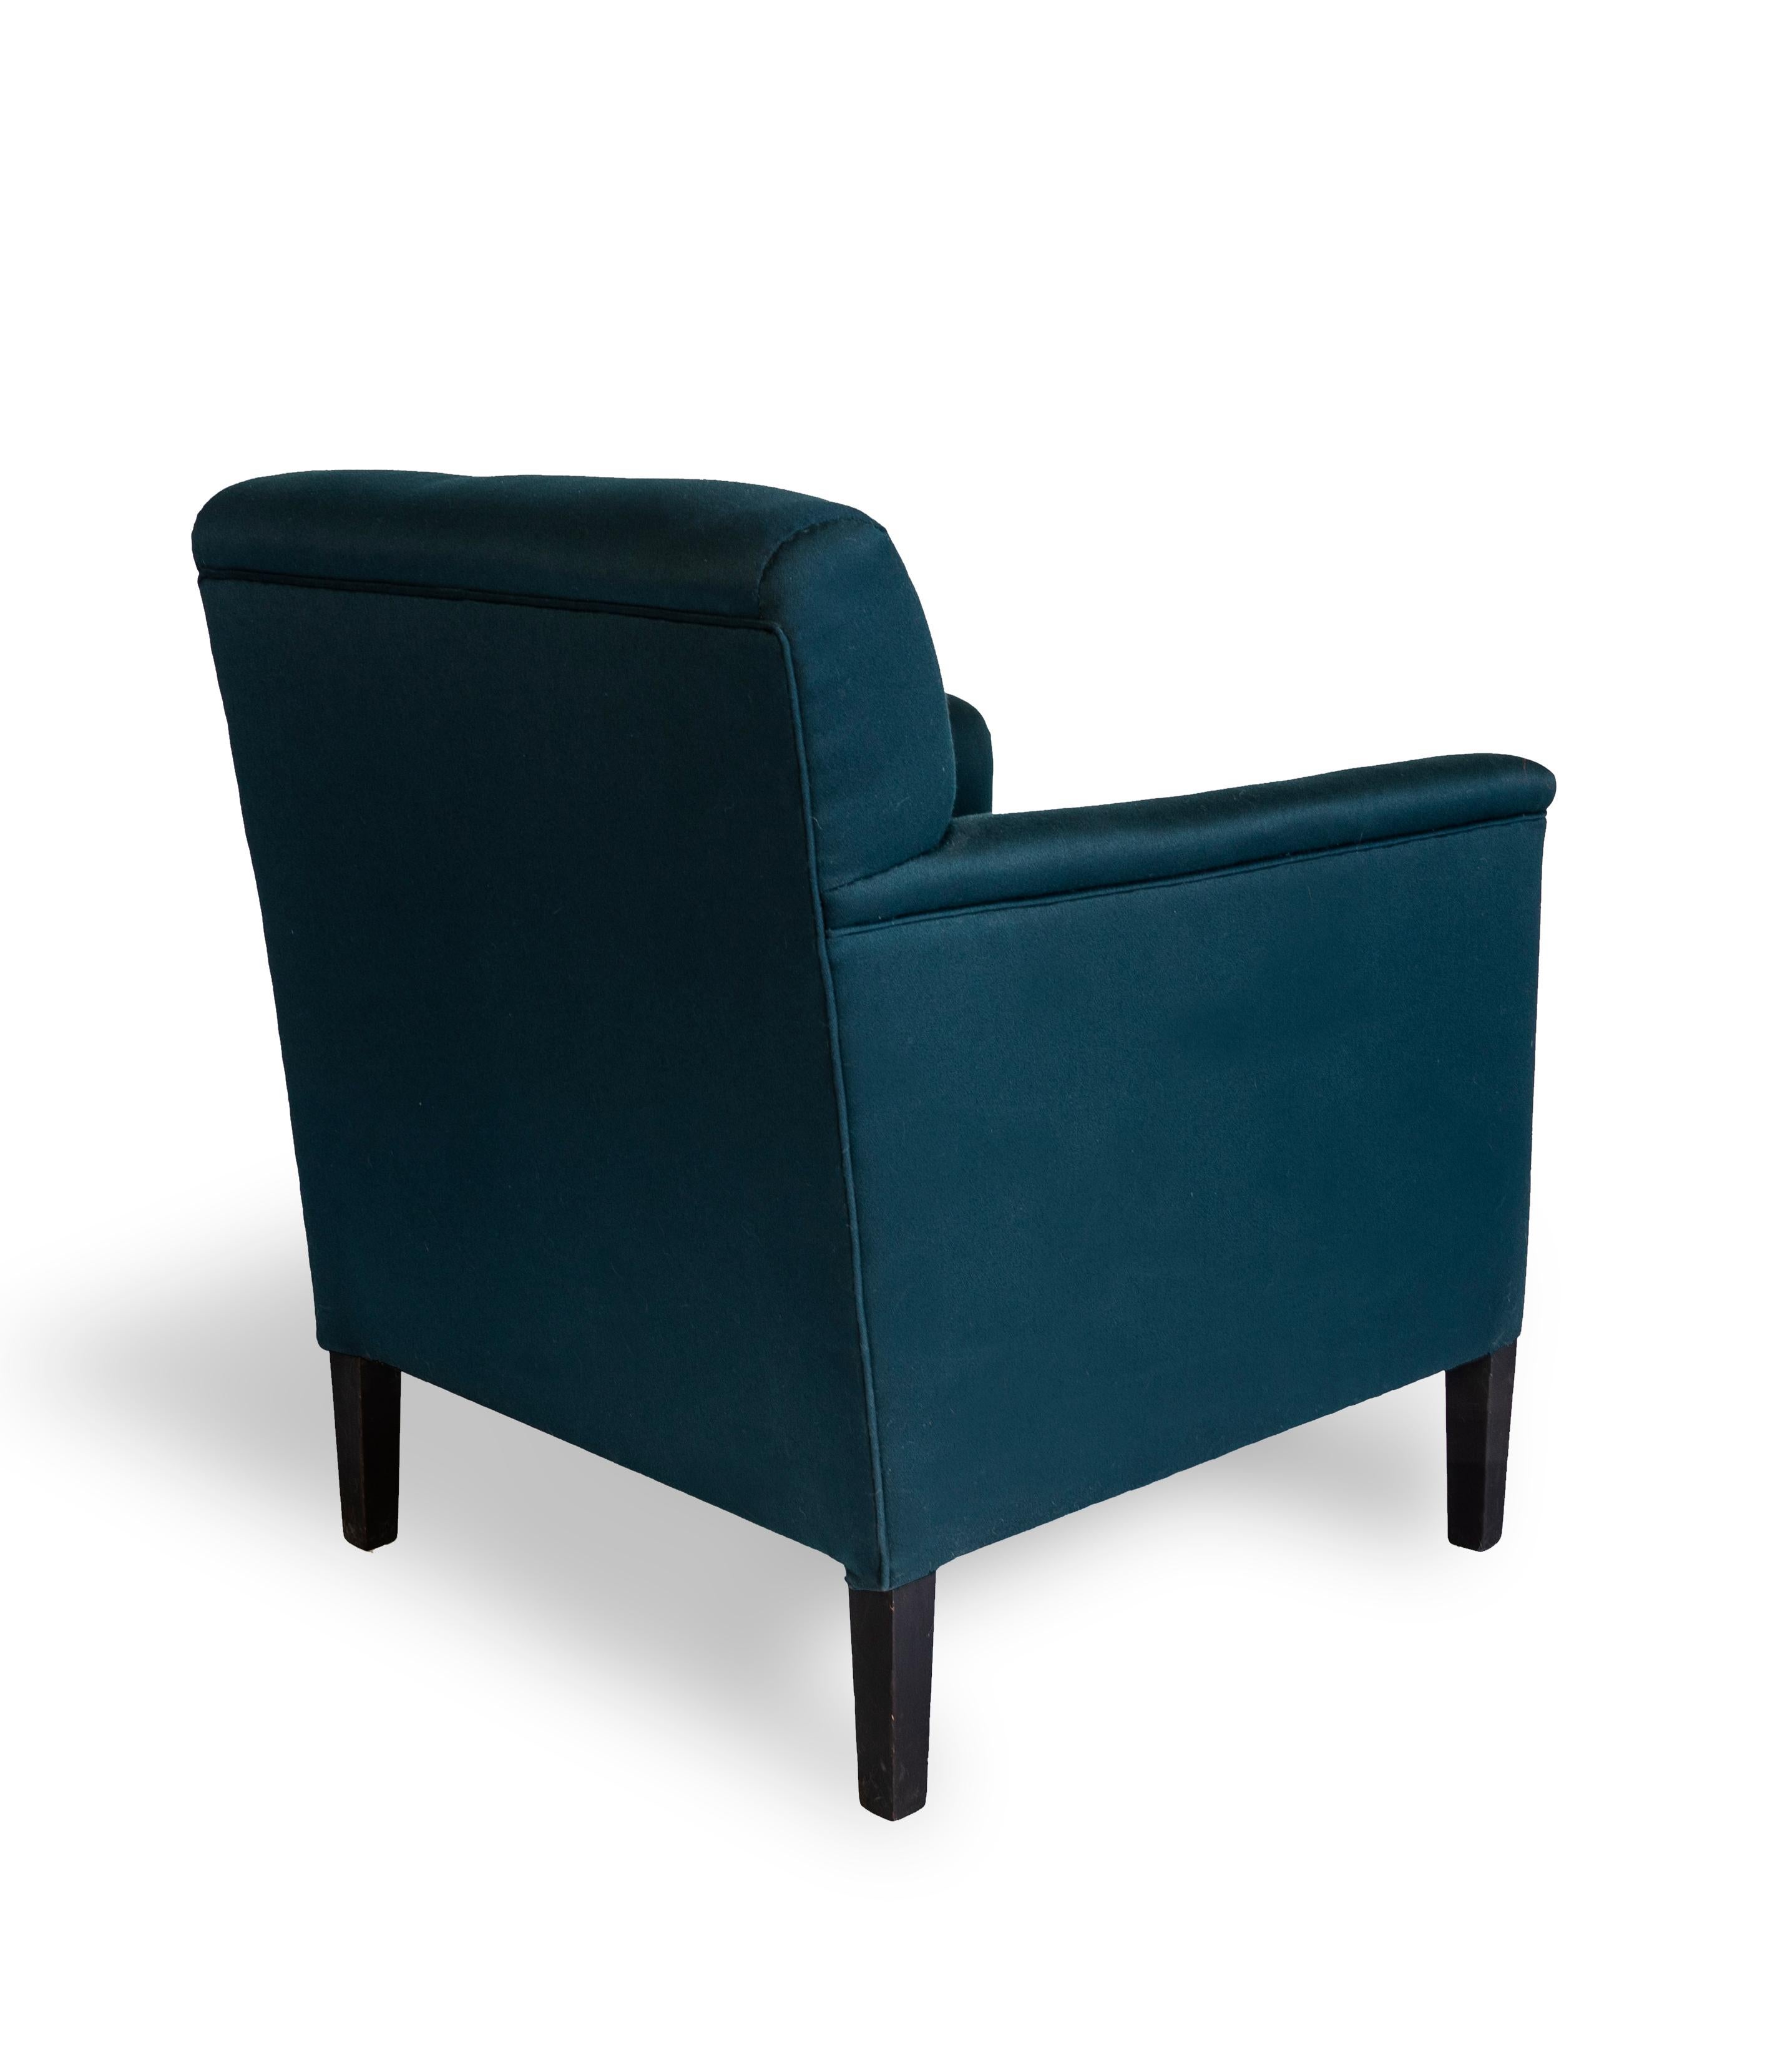 Contemporary Herbert Upholstered Chair in Wool, Vica designed by Annabelle Selldorf